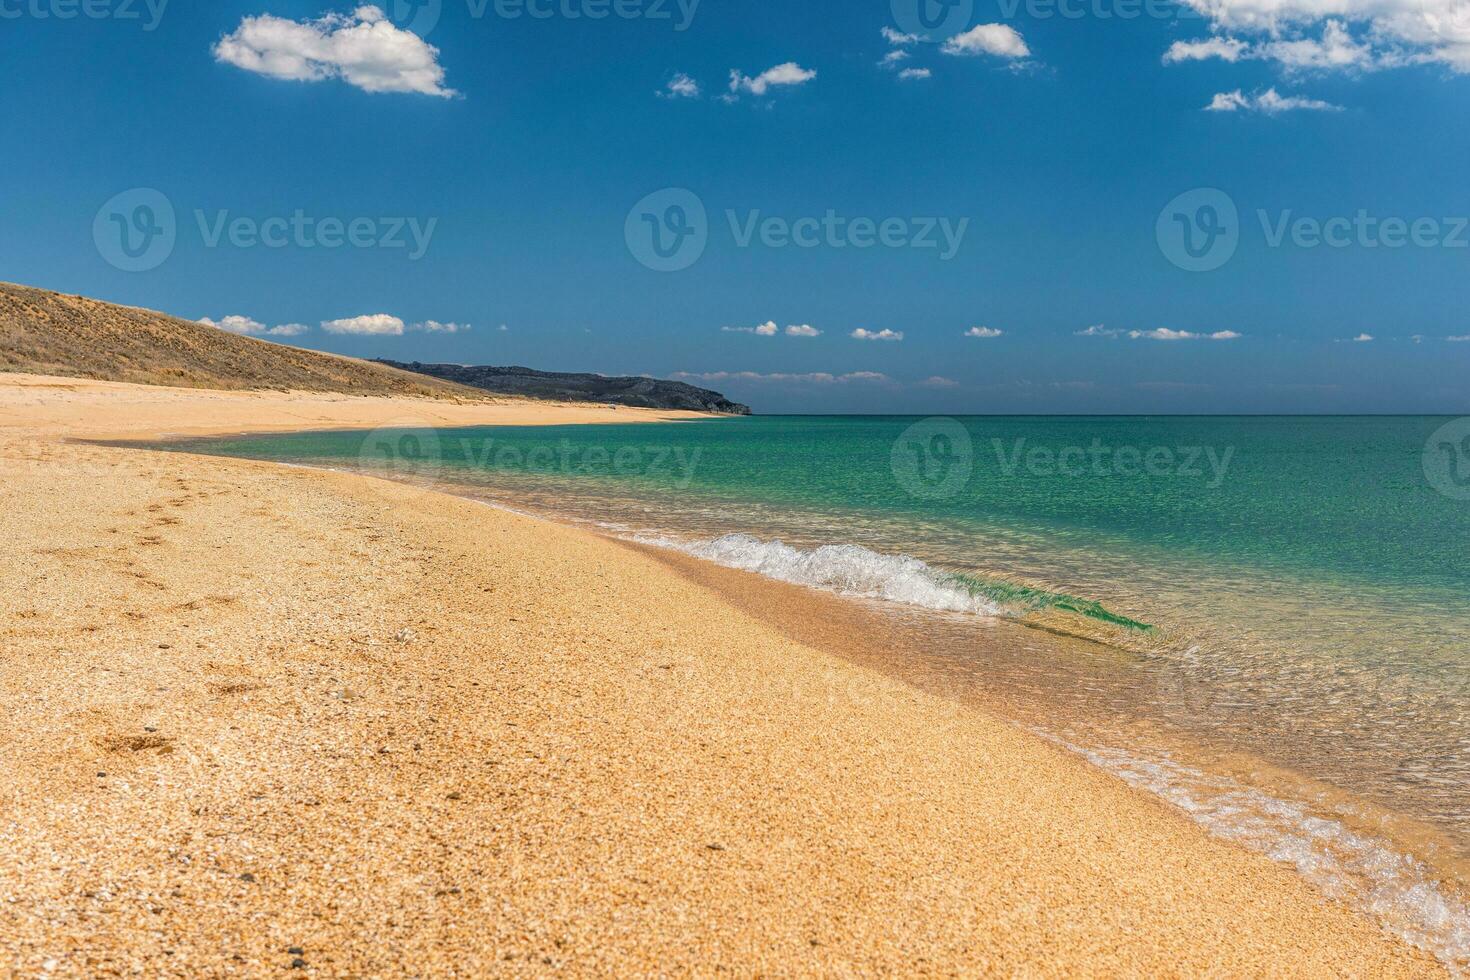 Empty beautiful soft golden sandy beach and sea. Isolated beach, no people. Dry sunny daytime image, where gold sand meets sea and emerald sea meets blue cloudy sky. Copy space, full frame. photo